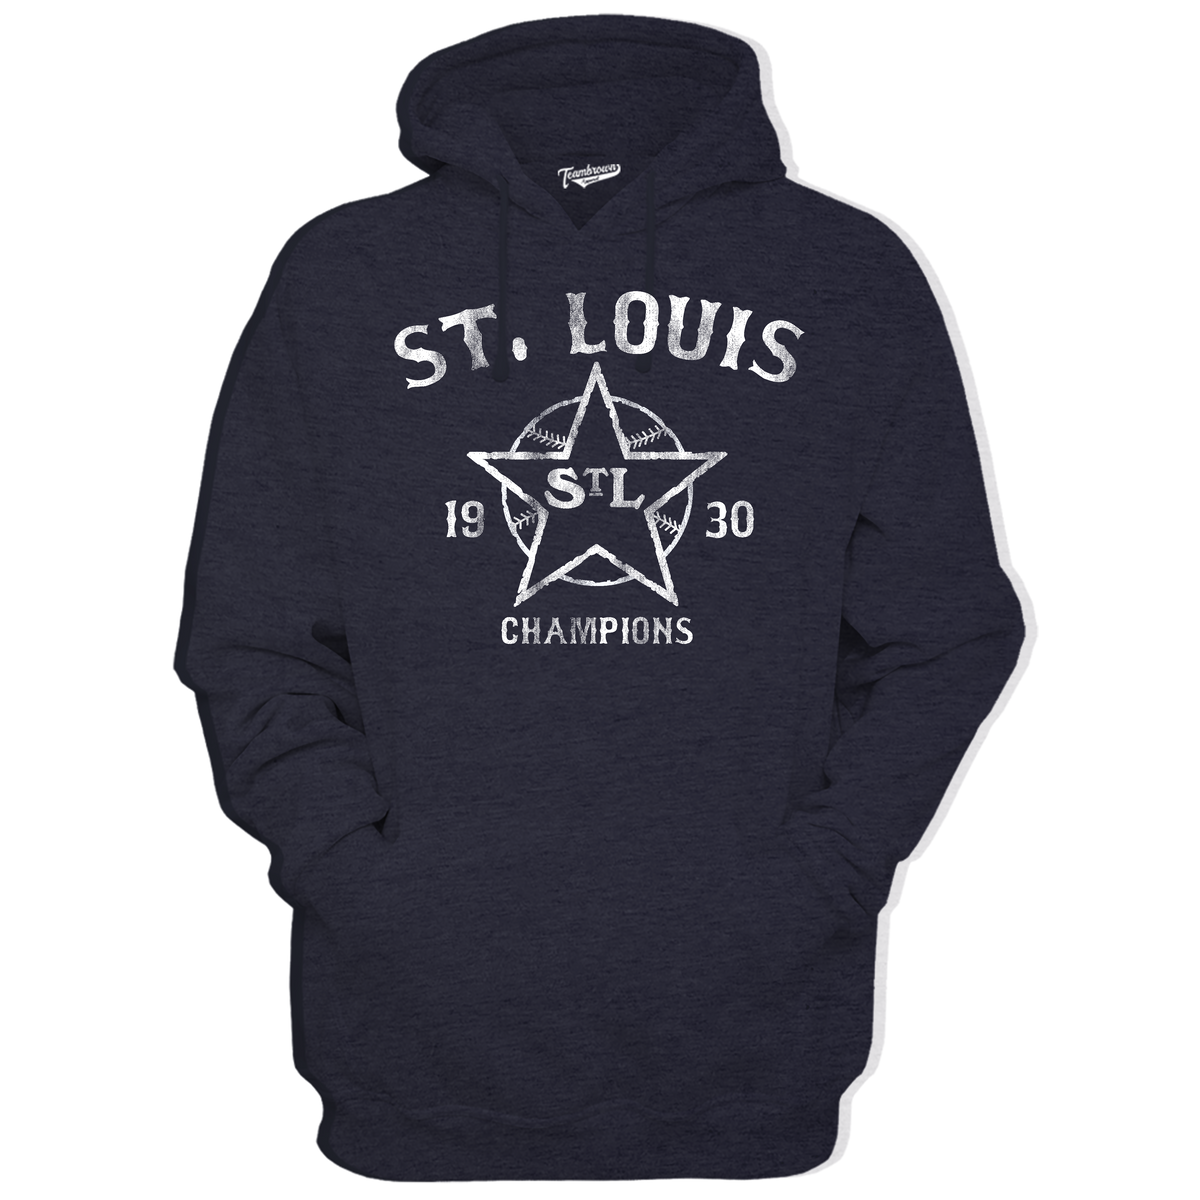 Unisex Teambrown St. Louis Stars Champions Collection T-Shirt